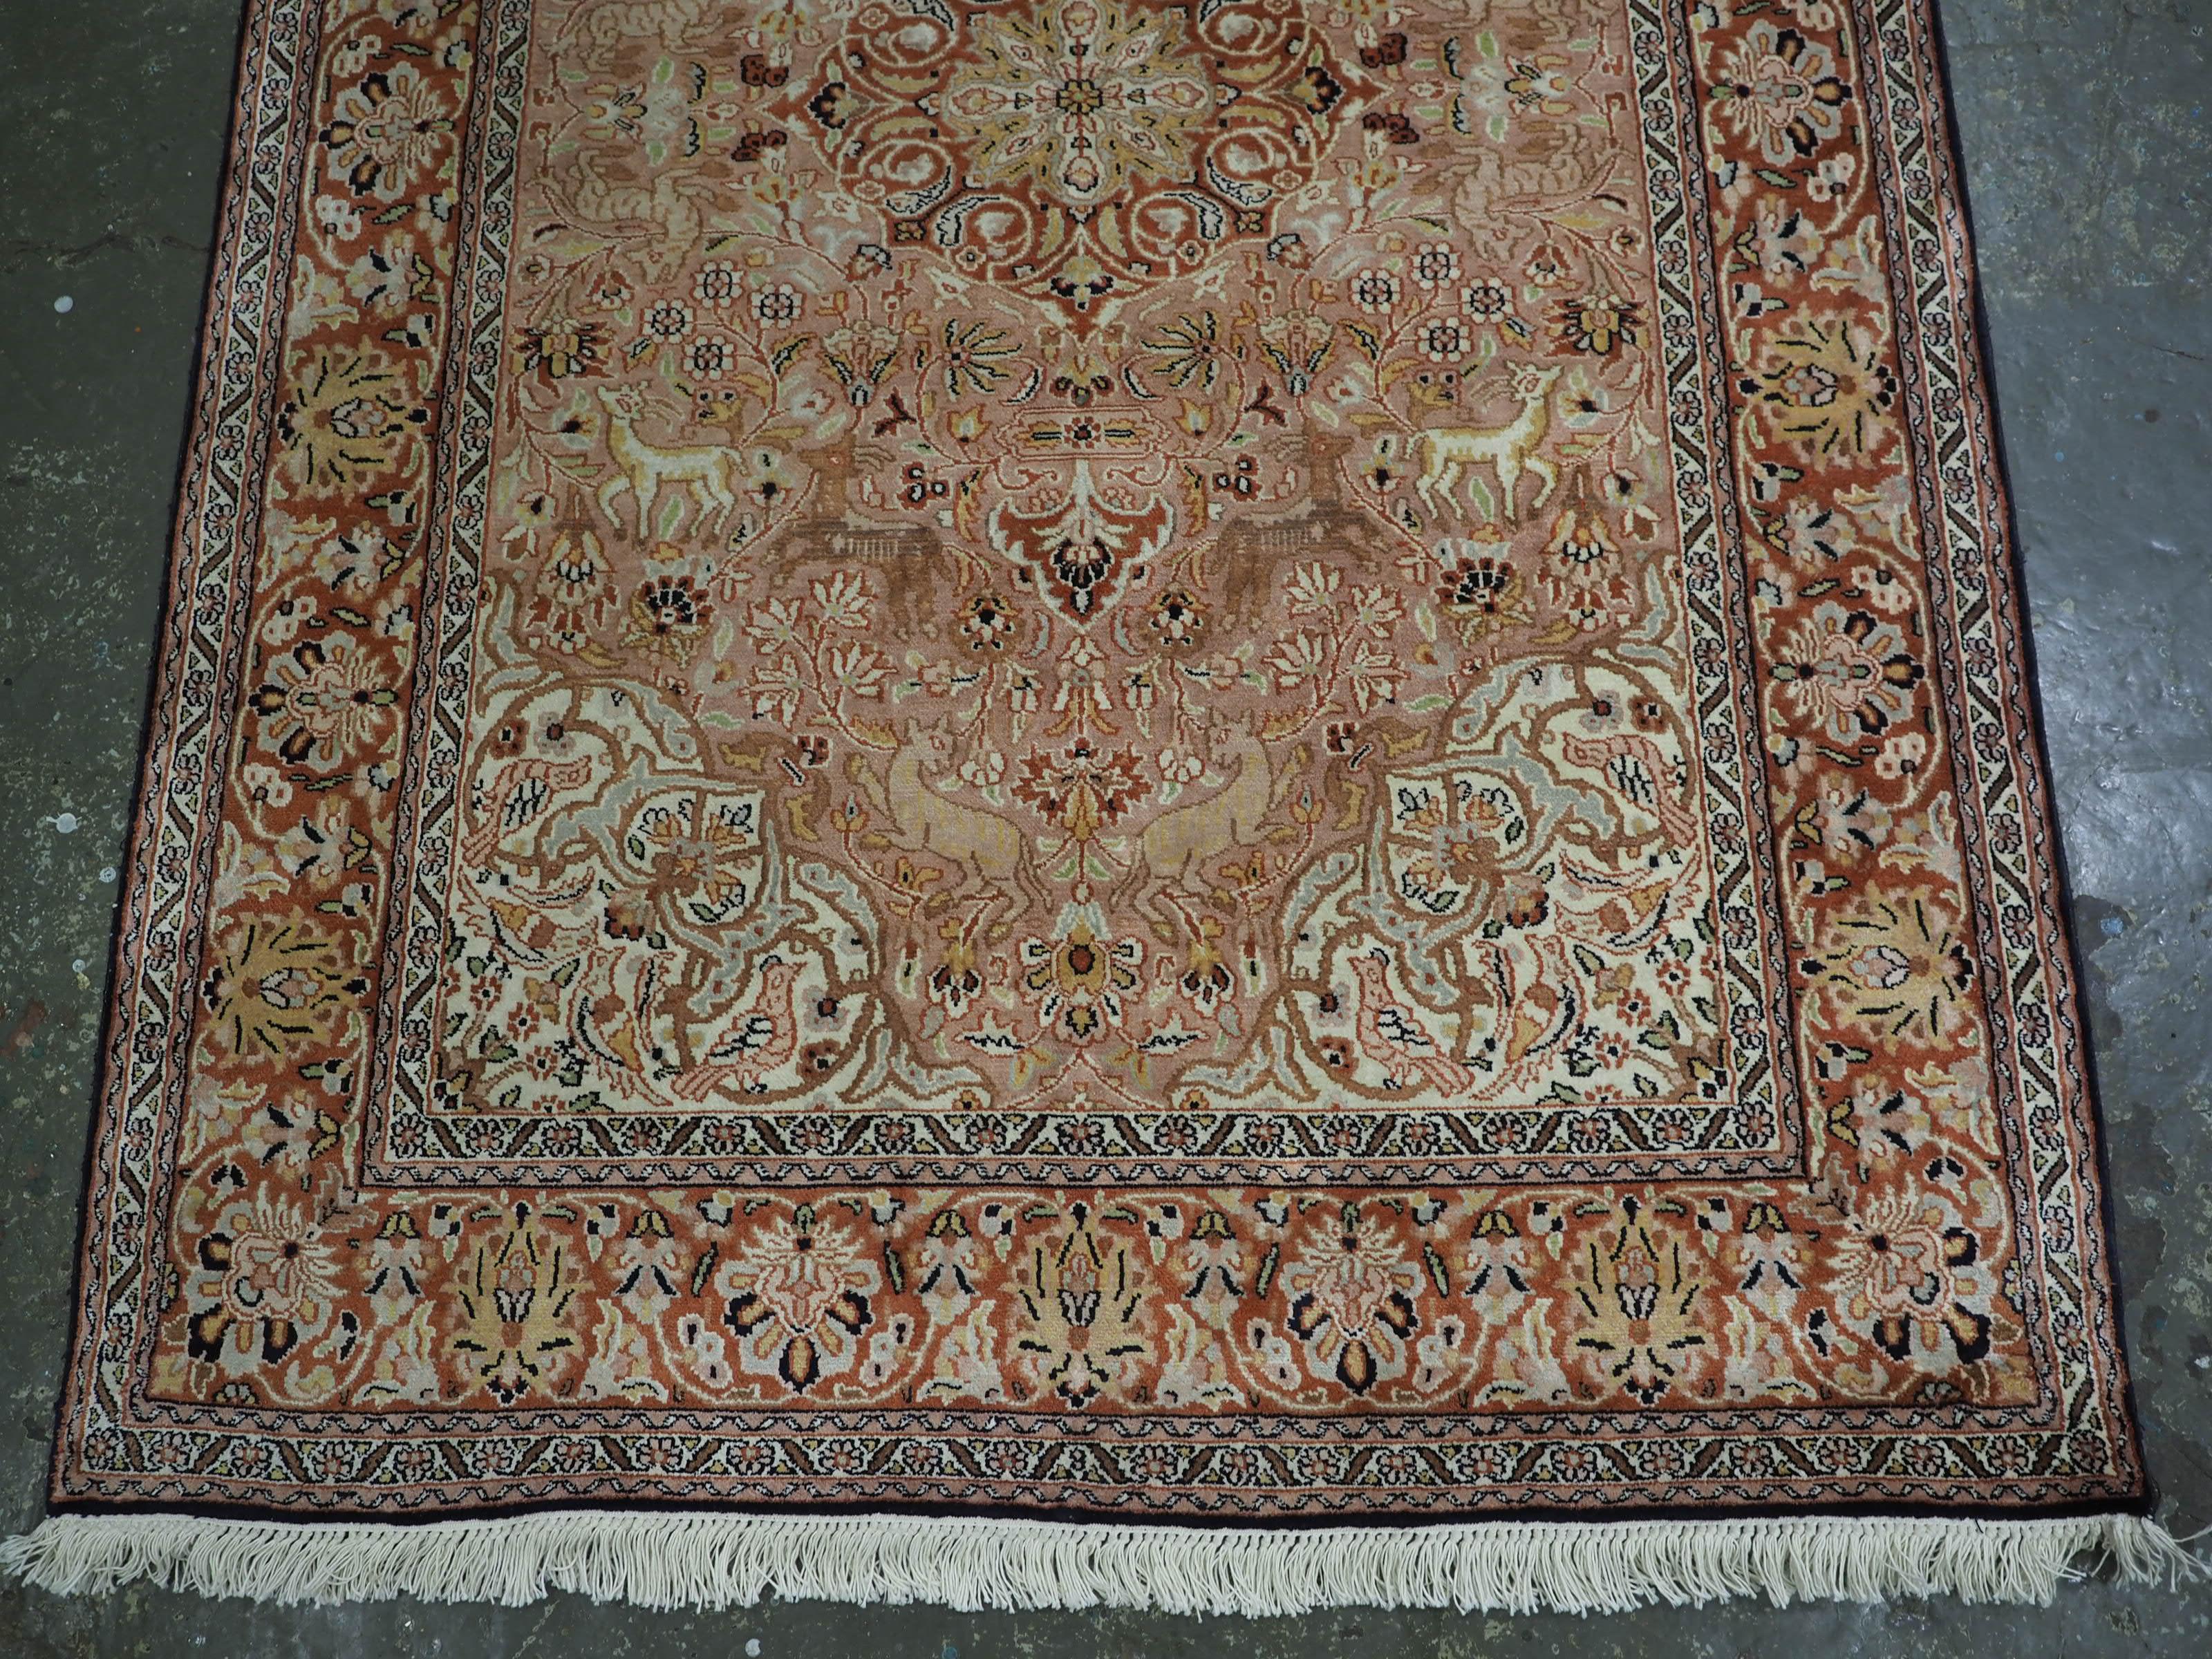 Early 20th Century Kashmir silk rug with a small medallion design in garden of animals & flowers. For Sale